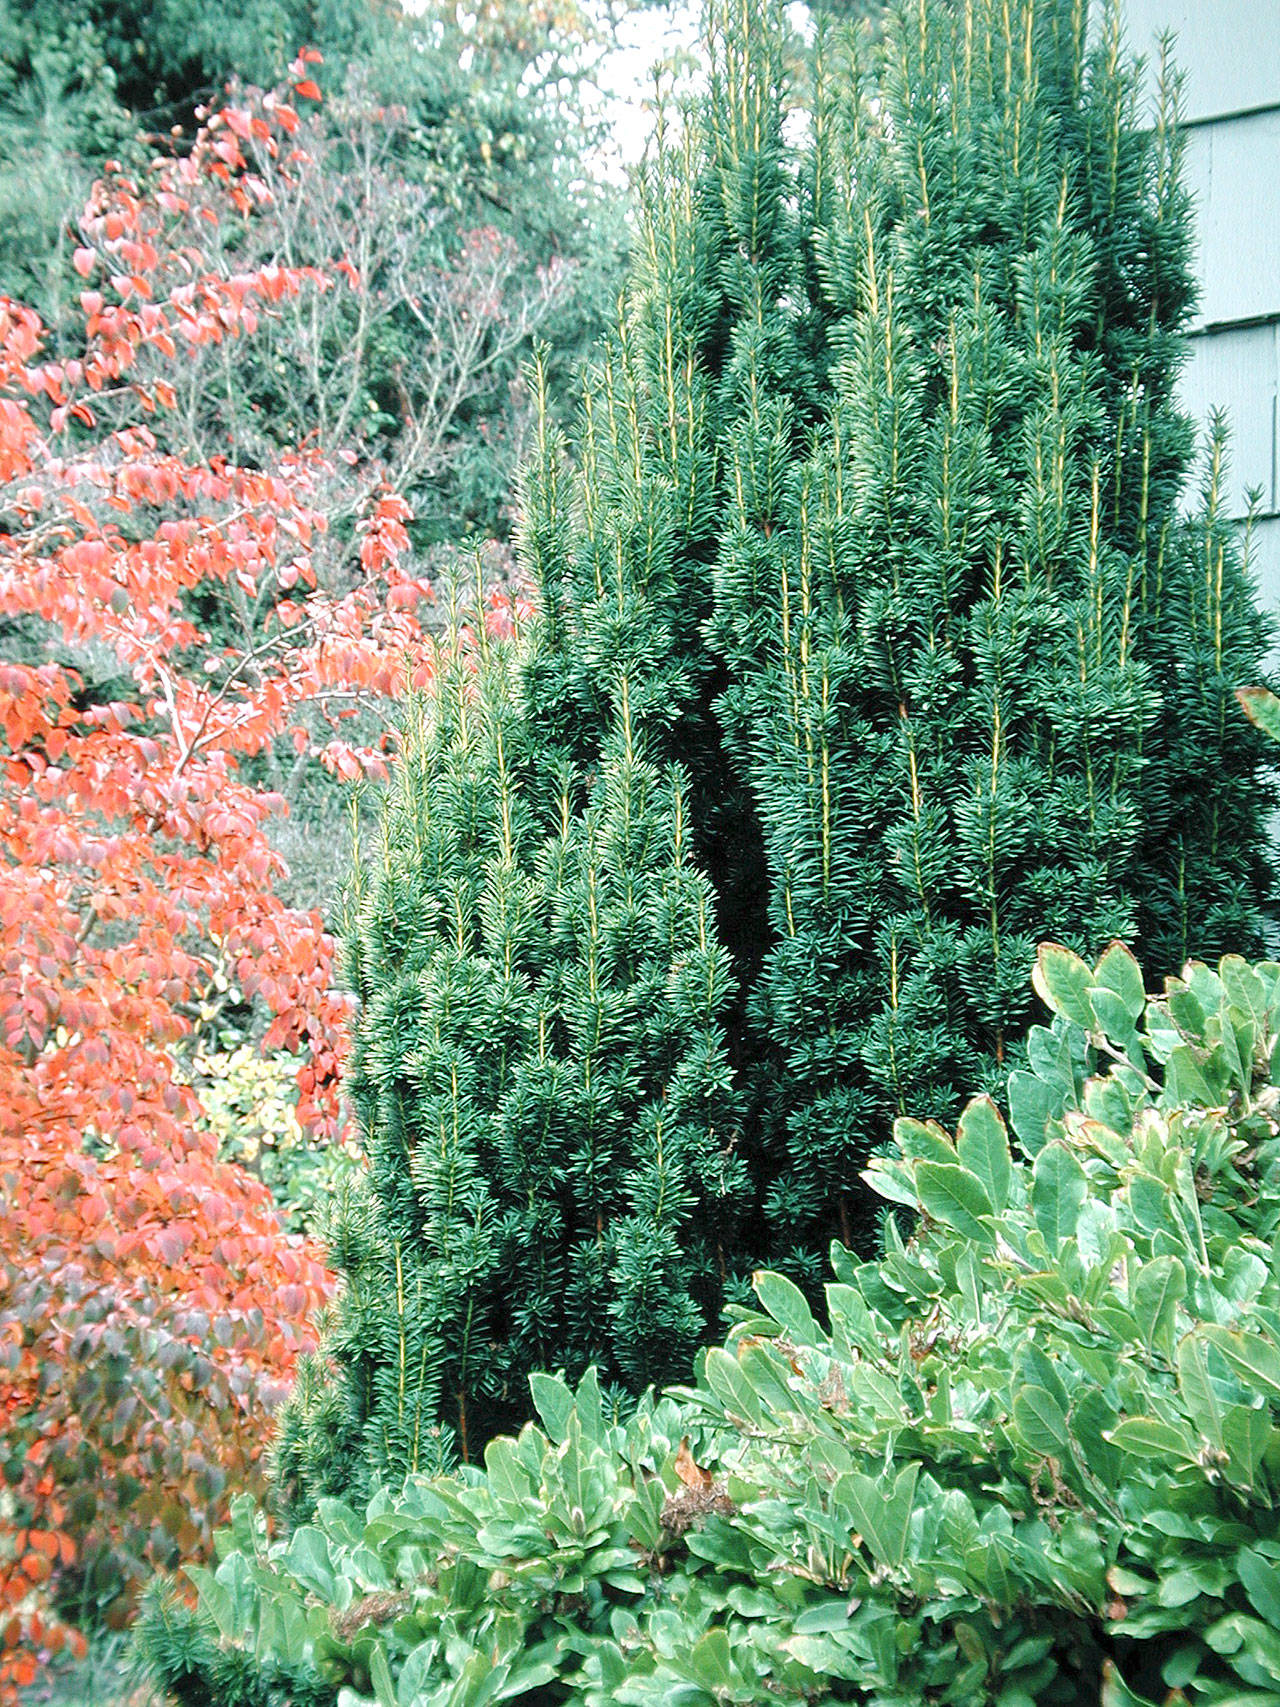 The Irish yew was discovered in Ireland in 1780 and has been a favorite for formal hedges ever since. (Richie Steffen)